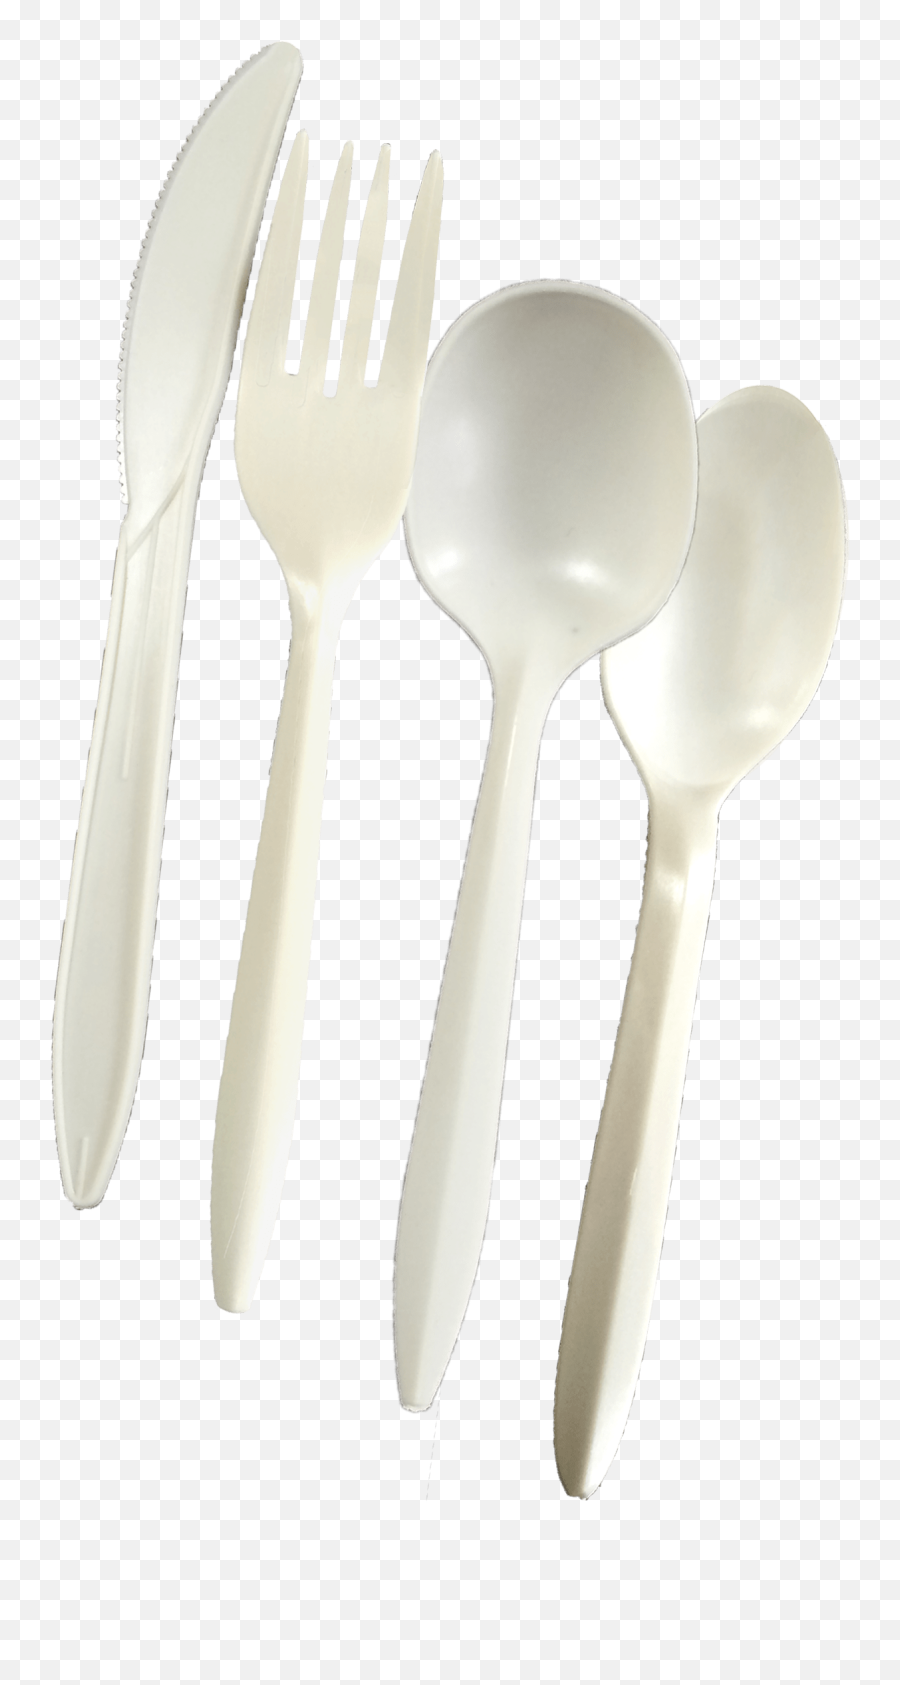 Line Of Disposable Retail - Knife Png,Silverware Png